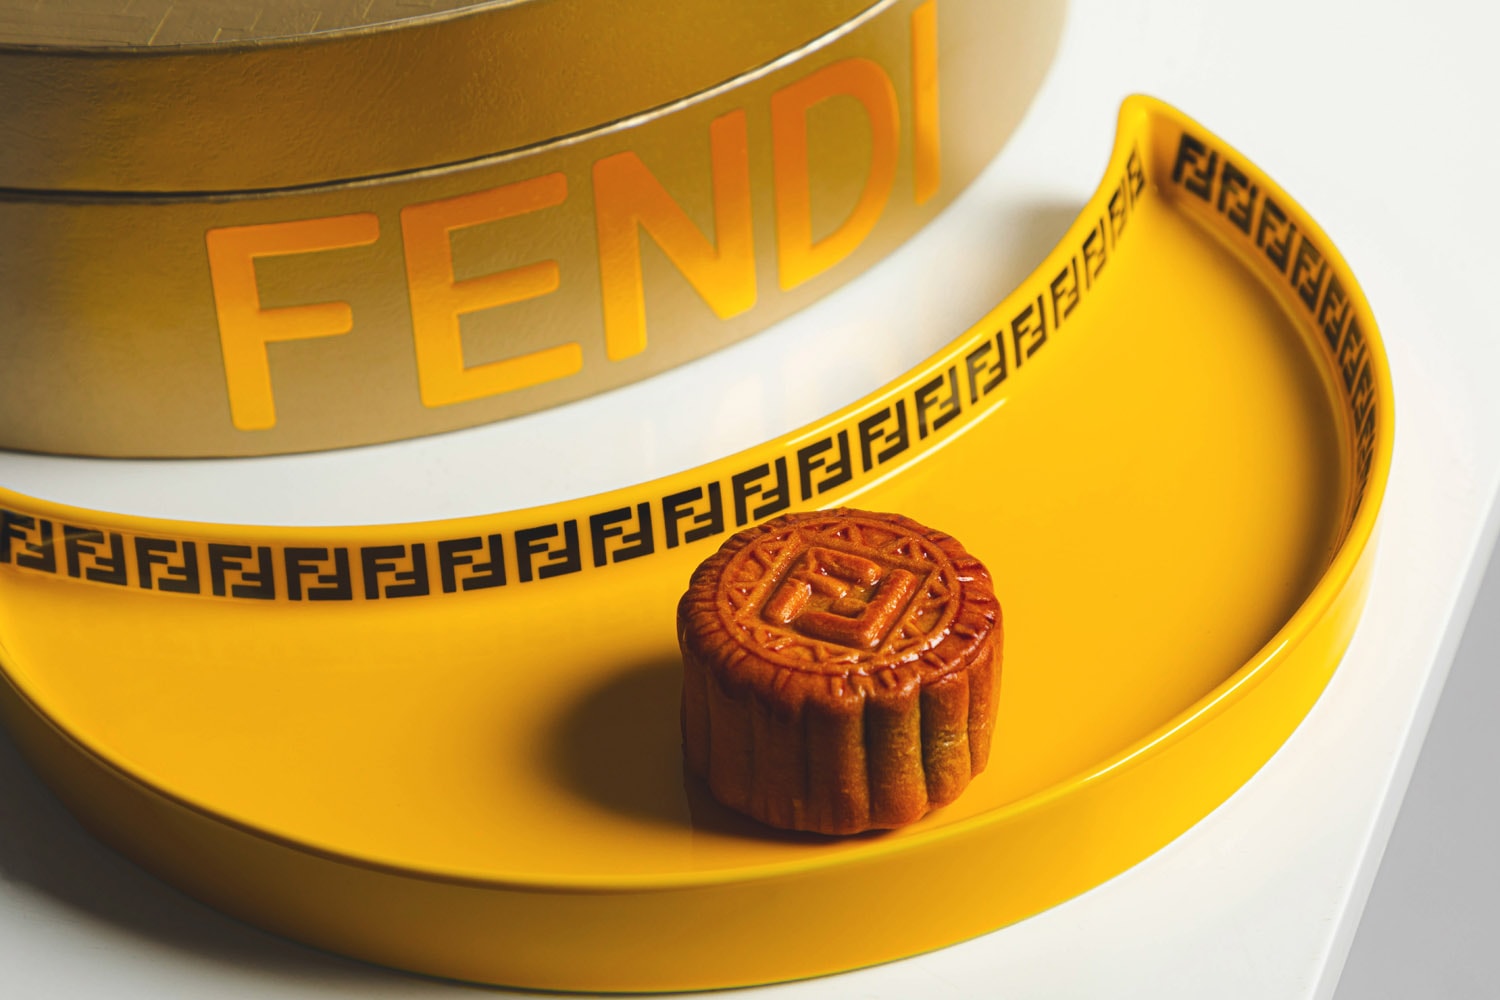 The Best Mooncakes To Enjoy This Mid-Autumn Festival 2022